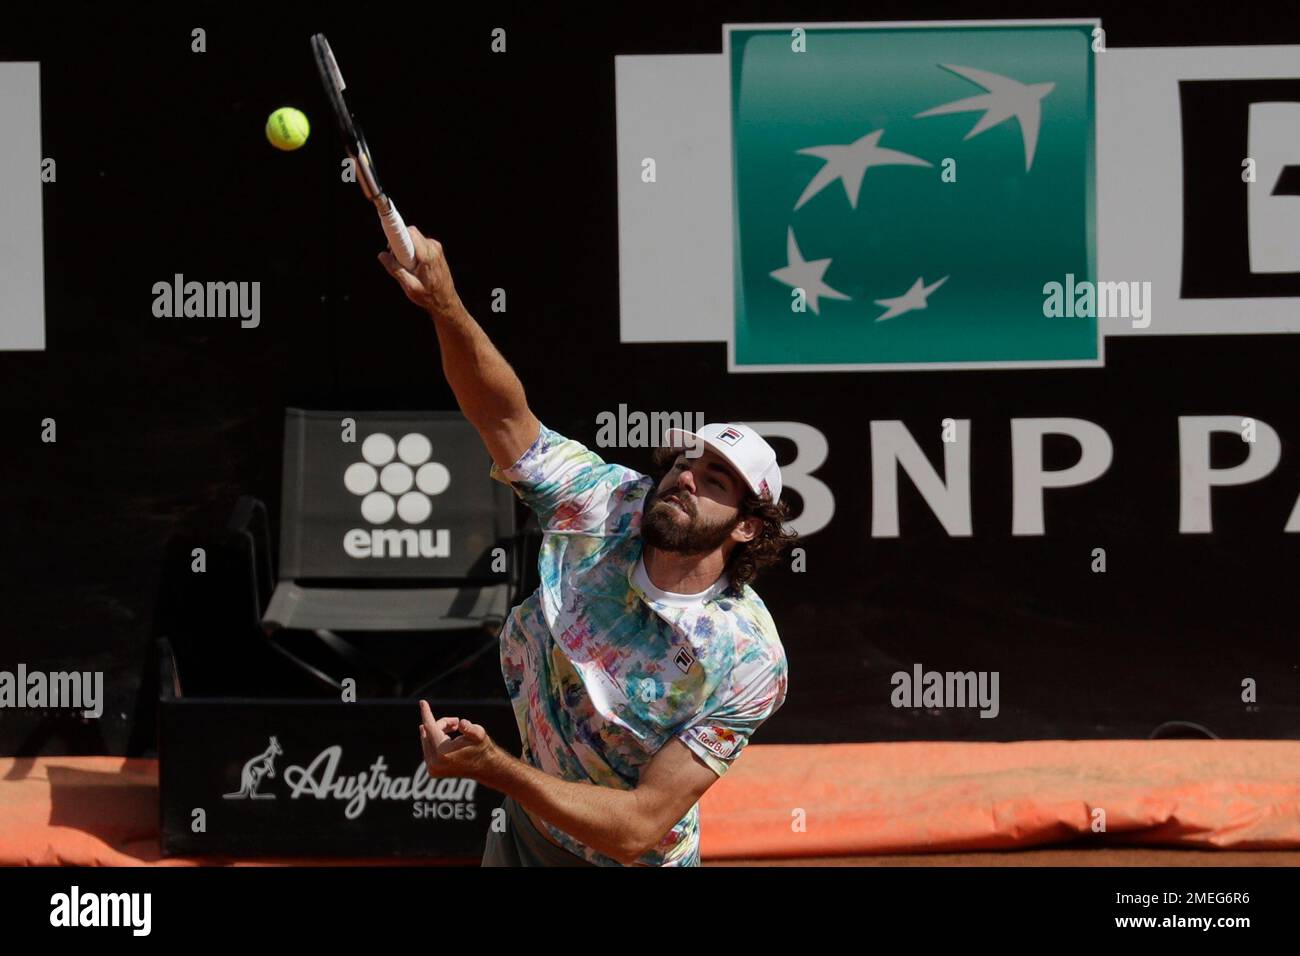 Reilly Opelka, of the United States, serves the basll during their quarter-final match at the Italian Open tennis tournament, in Rome, Friday, May 14, 2021